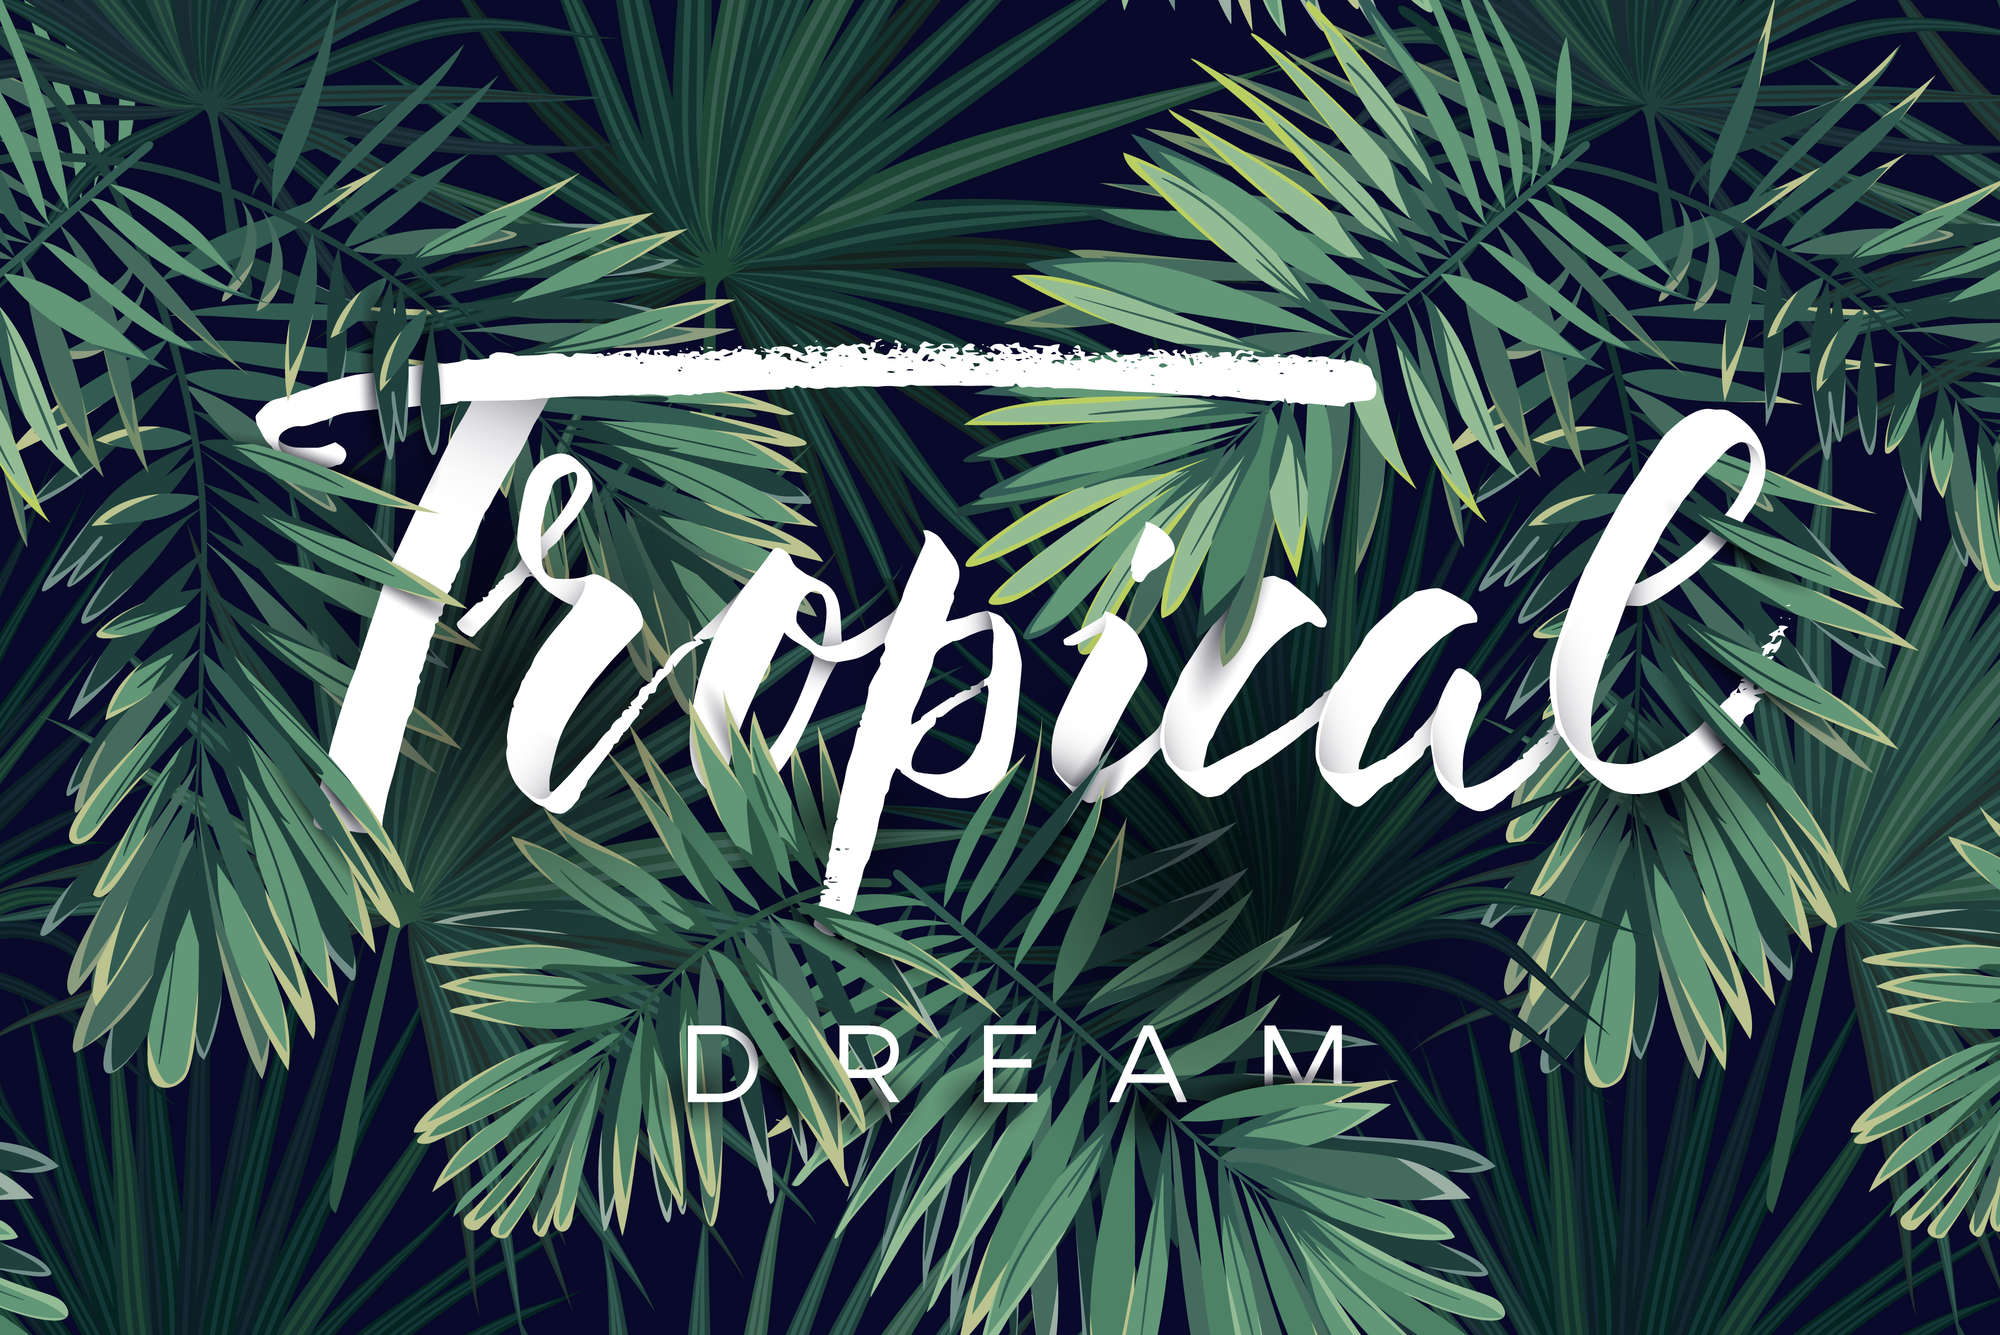             Graphic mural "Tropical Dream" lettering on mother of pearl smooth fleece
        